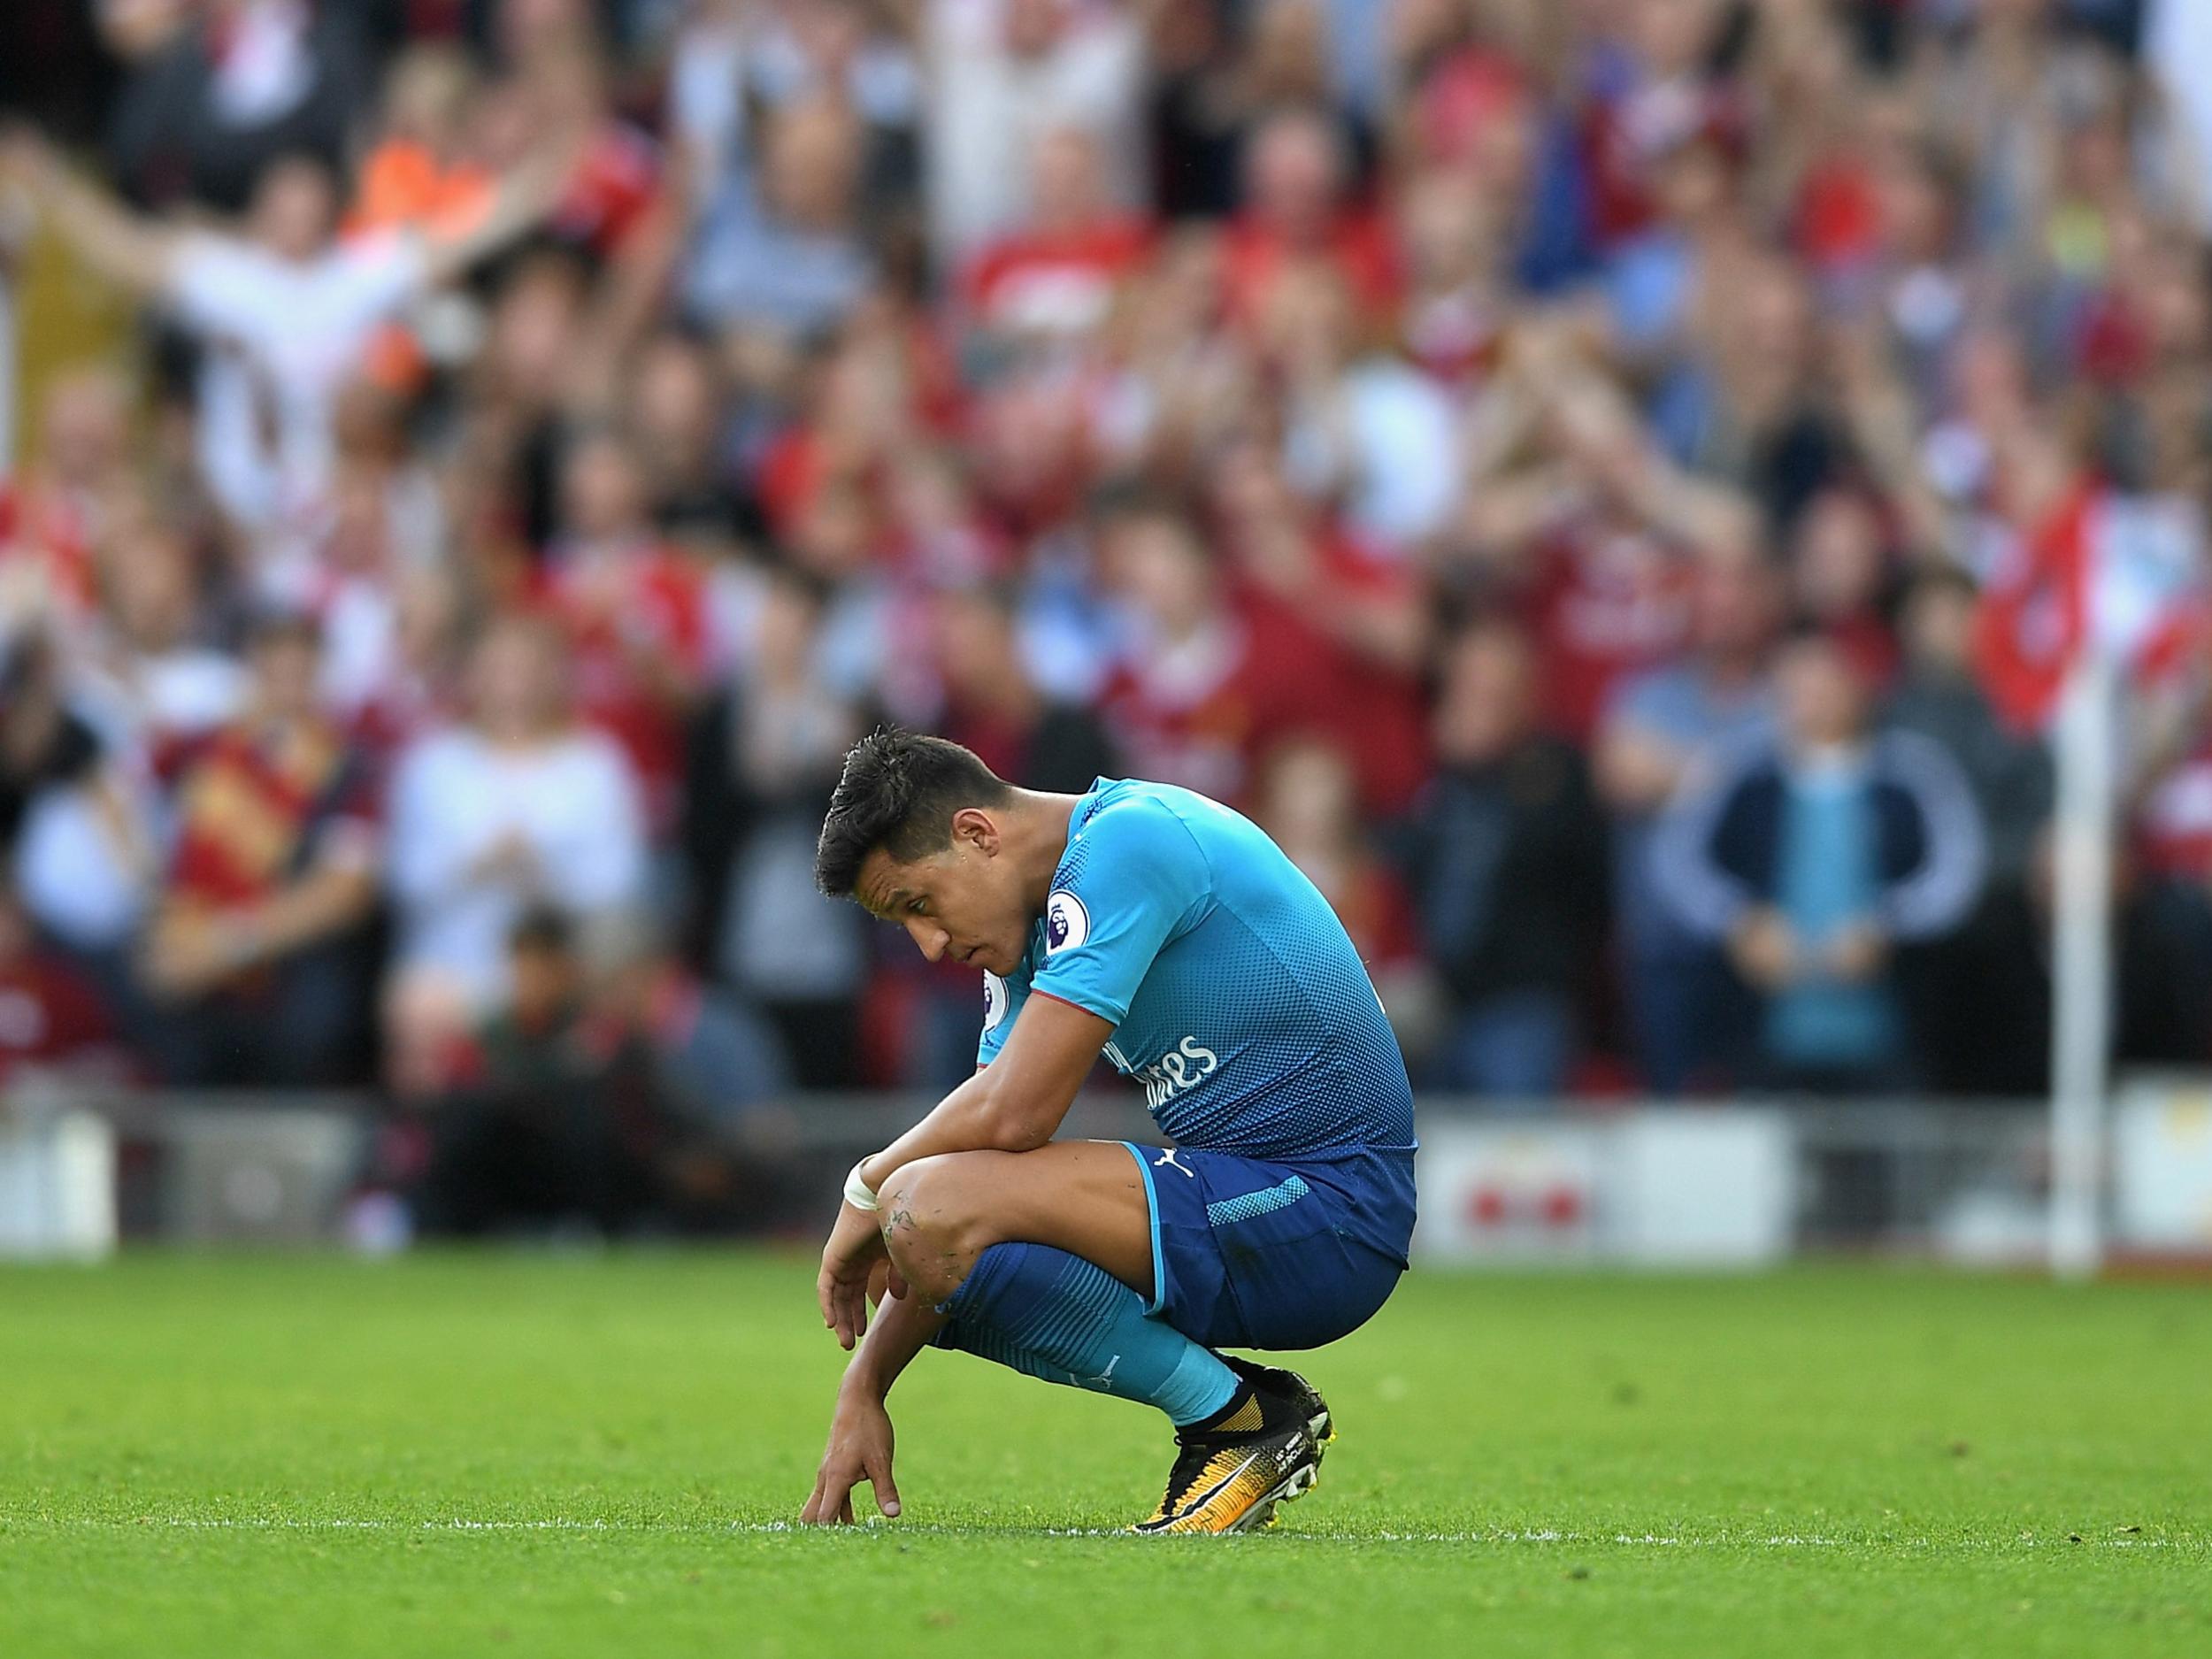 Arsenal insist that Alexis Sanchez will remain an Arsenal player unless an adequate replacement can be found